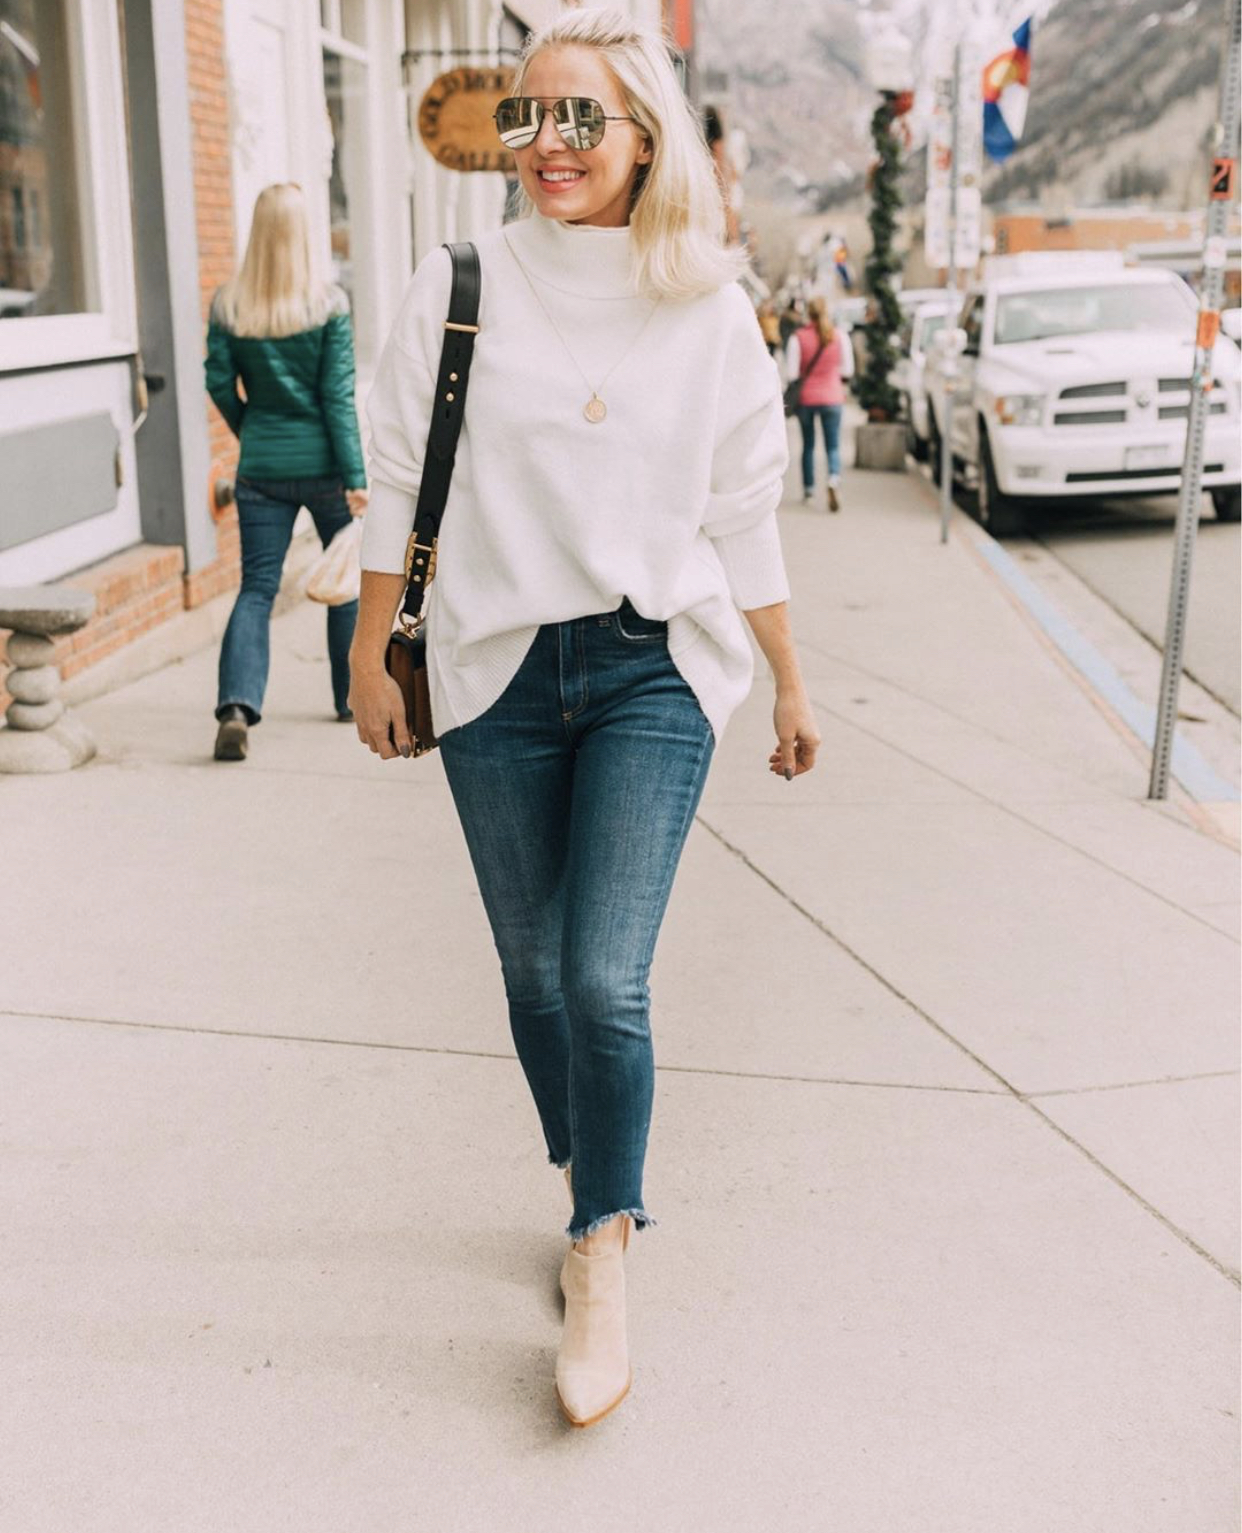 Denim on sale at Nordstrom featuring Rag and Bone and Moussy denim on Fashion Blogger Erin Busbee of Busbee Style in Telluride Colorado